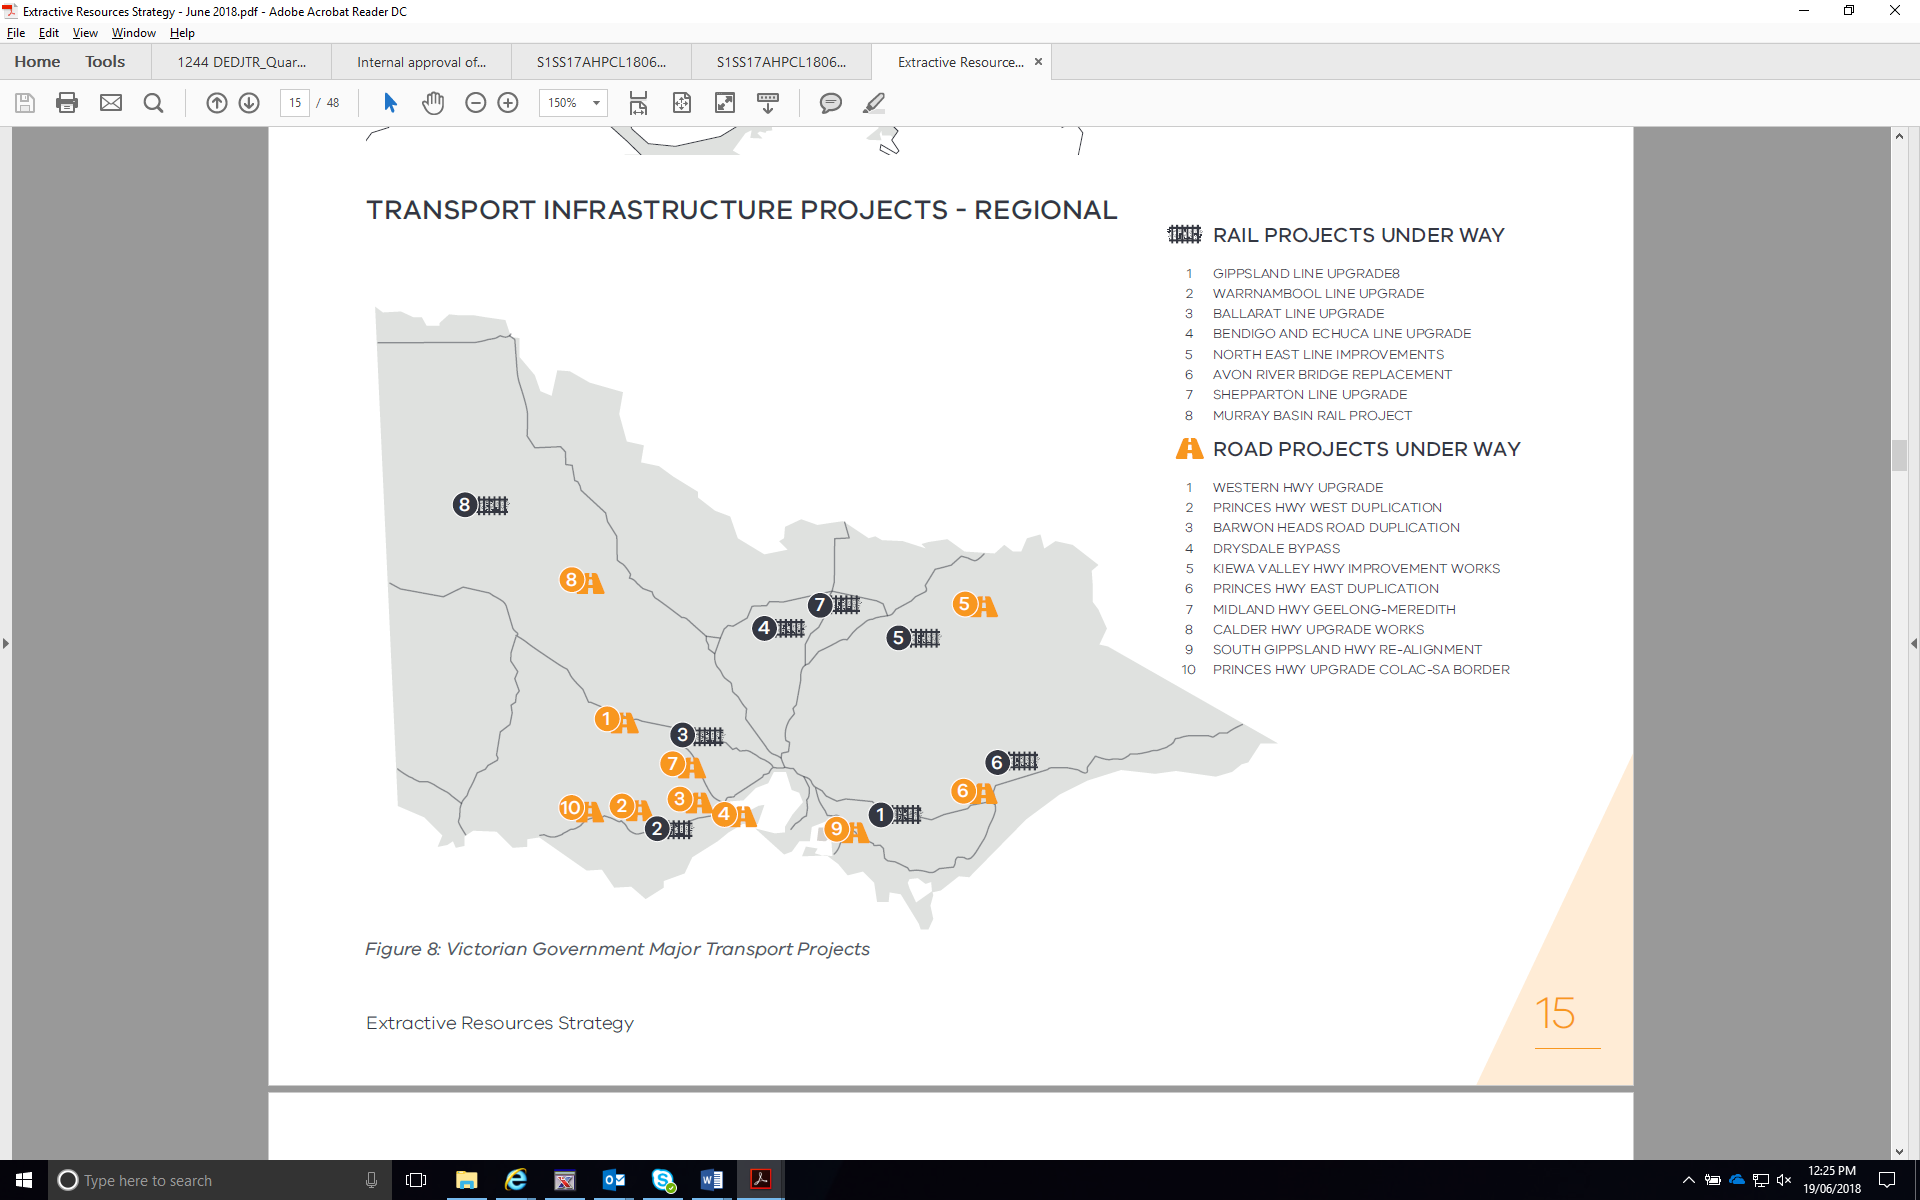 image is a map of victoria showing current transport infrastructure projects underway. outside of greater melbourne, there are 8 rail projects underway and 10 road projects.